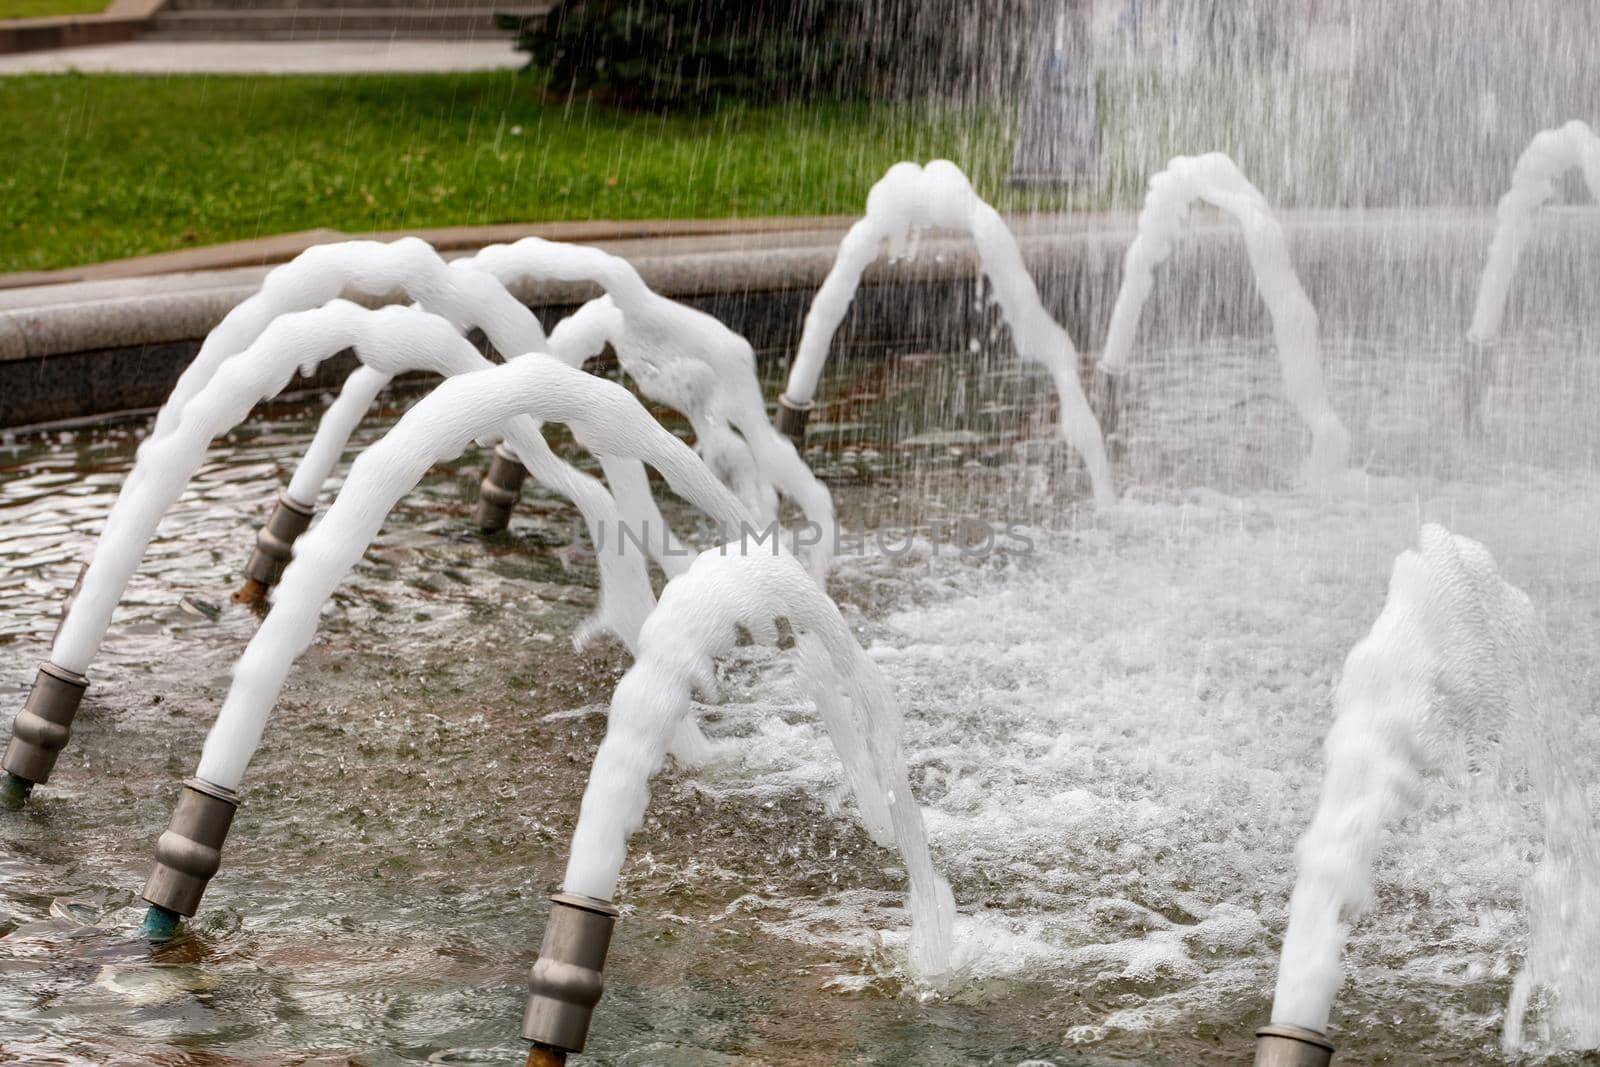 The foamed seething jets of water from the city fountain create an extravaganza of splashes and a beautiful rhythm.